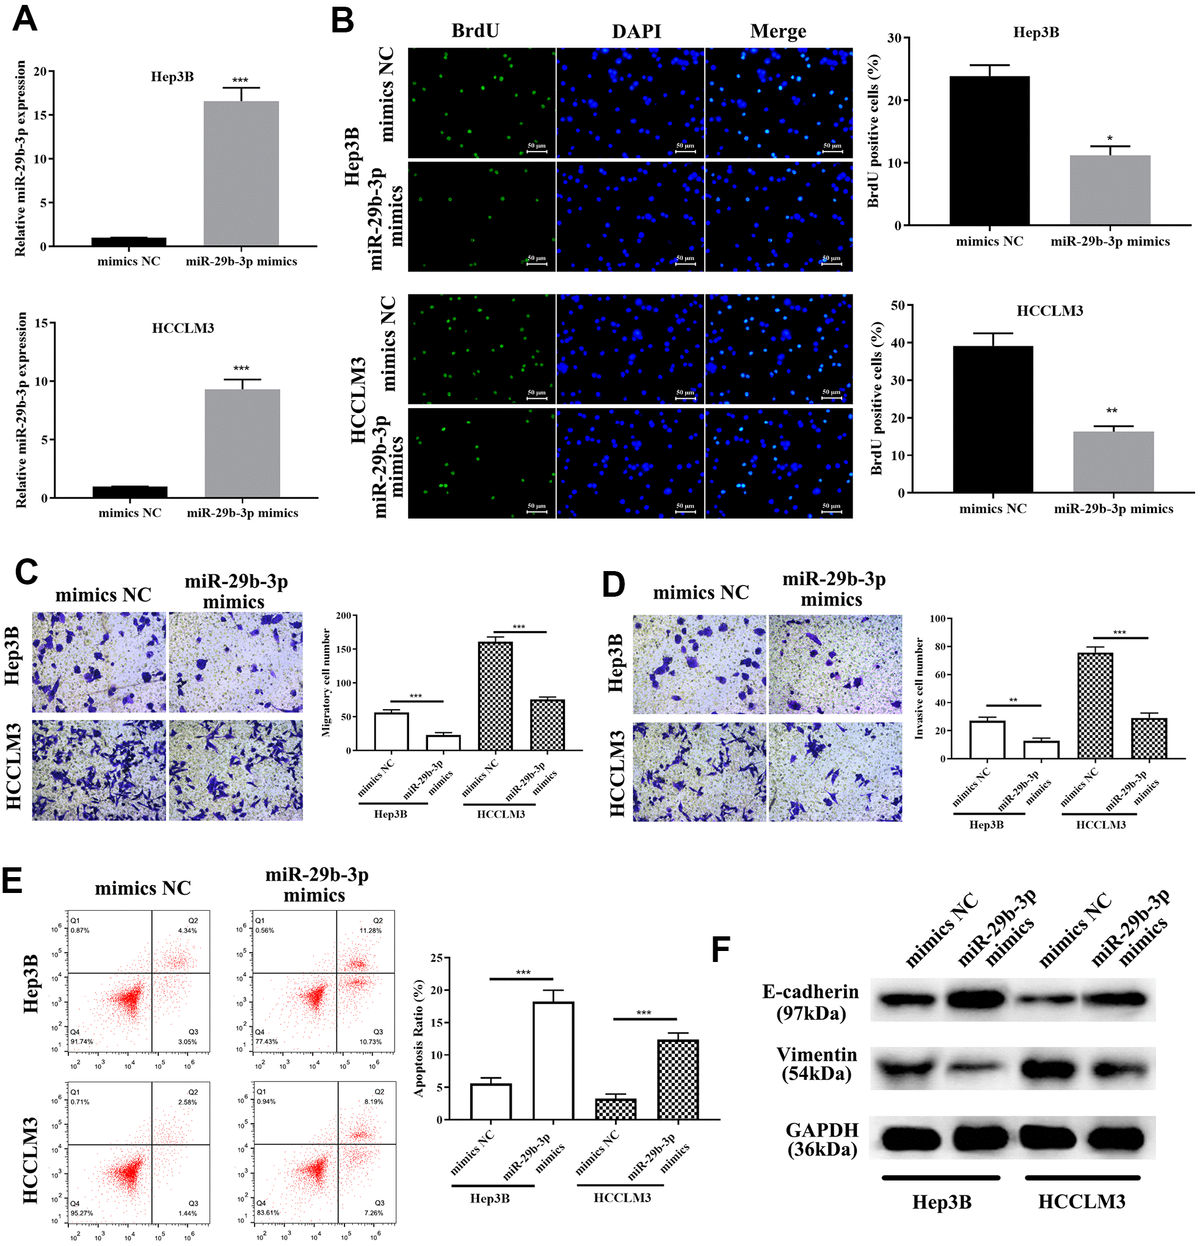 miR-29b-3p precludes hepatocellular carcinoma cell proliferation and migration through enhancing apoptosis and inhibiting the epithelial-mesenchymal transition (EMT) progress. (A) After treatment with miR-29b-3p mimics, HCCLM3 and Hep3B cell lines expressed high quantities of miR-29b-3p when compared to the mimics NC group. (B) Cells with high quantities of miR-29b-3p demonstrating a lower proliferation rate (*pC, D) miR-29b-3p significantly reduces hepatocellular carcinoma (HCC) cell migration and invasion (**pE) Cell apoptosis is improved by miR-29b-3p (***pF) Western blot showing that overexpression of miR-29b-3p results in up-regulation of E-cadherin and reduced level of vimentin.